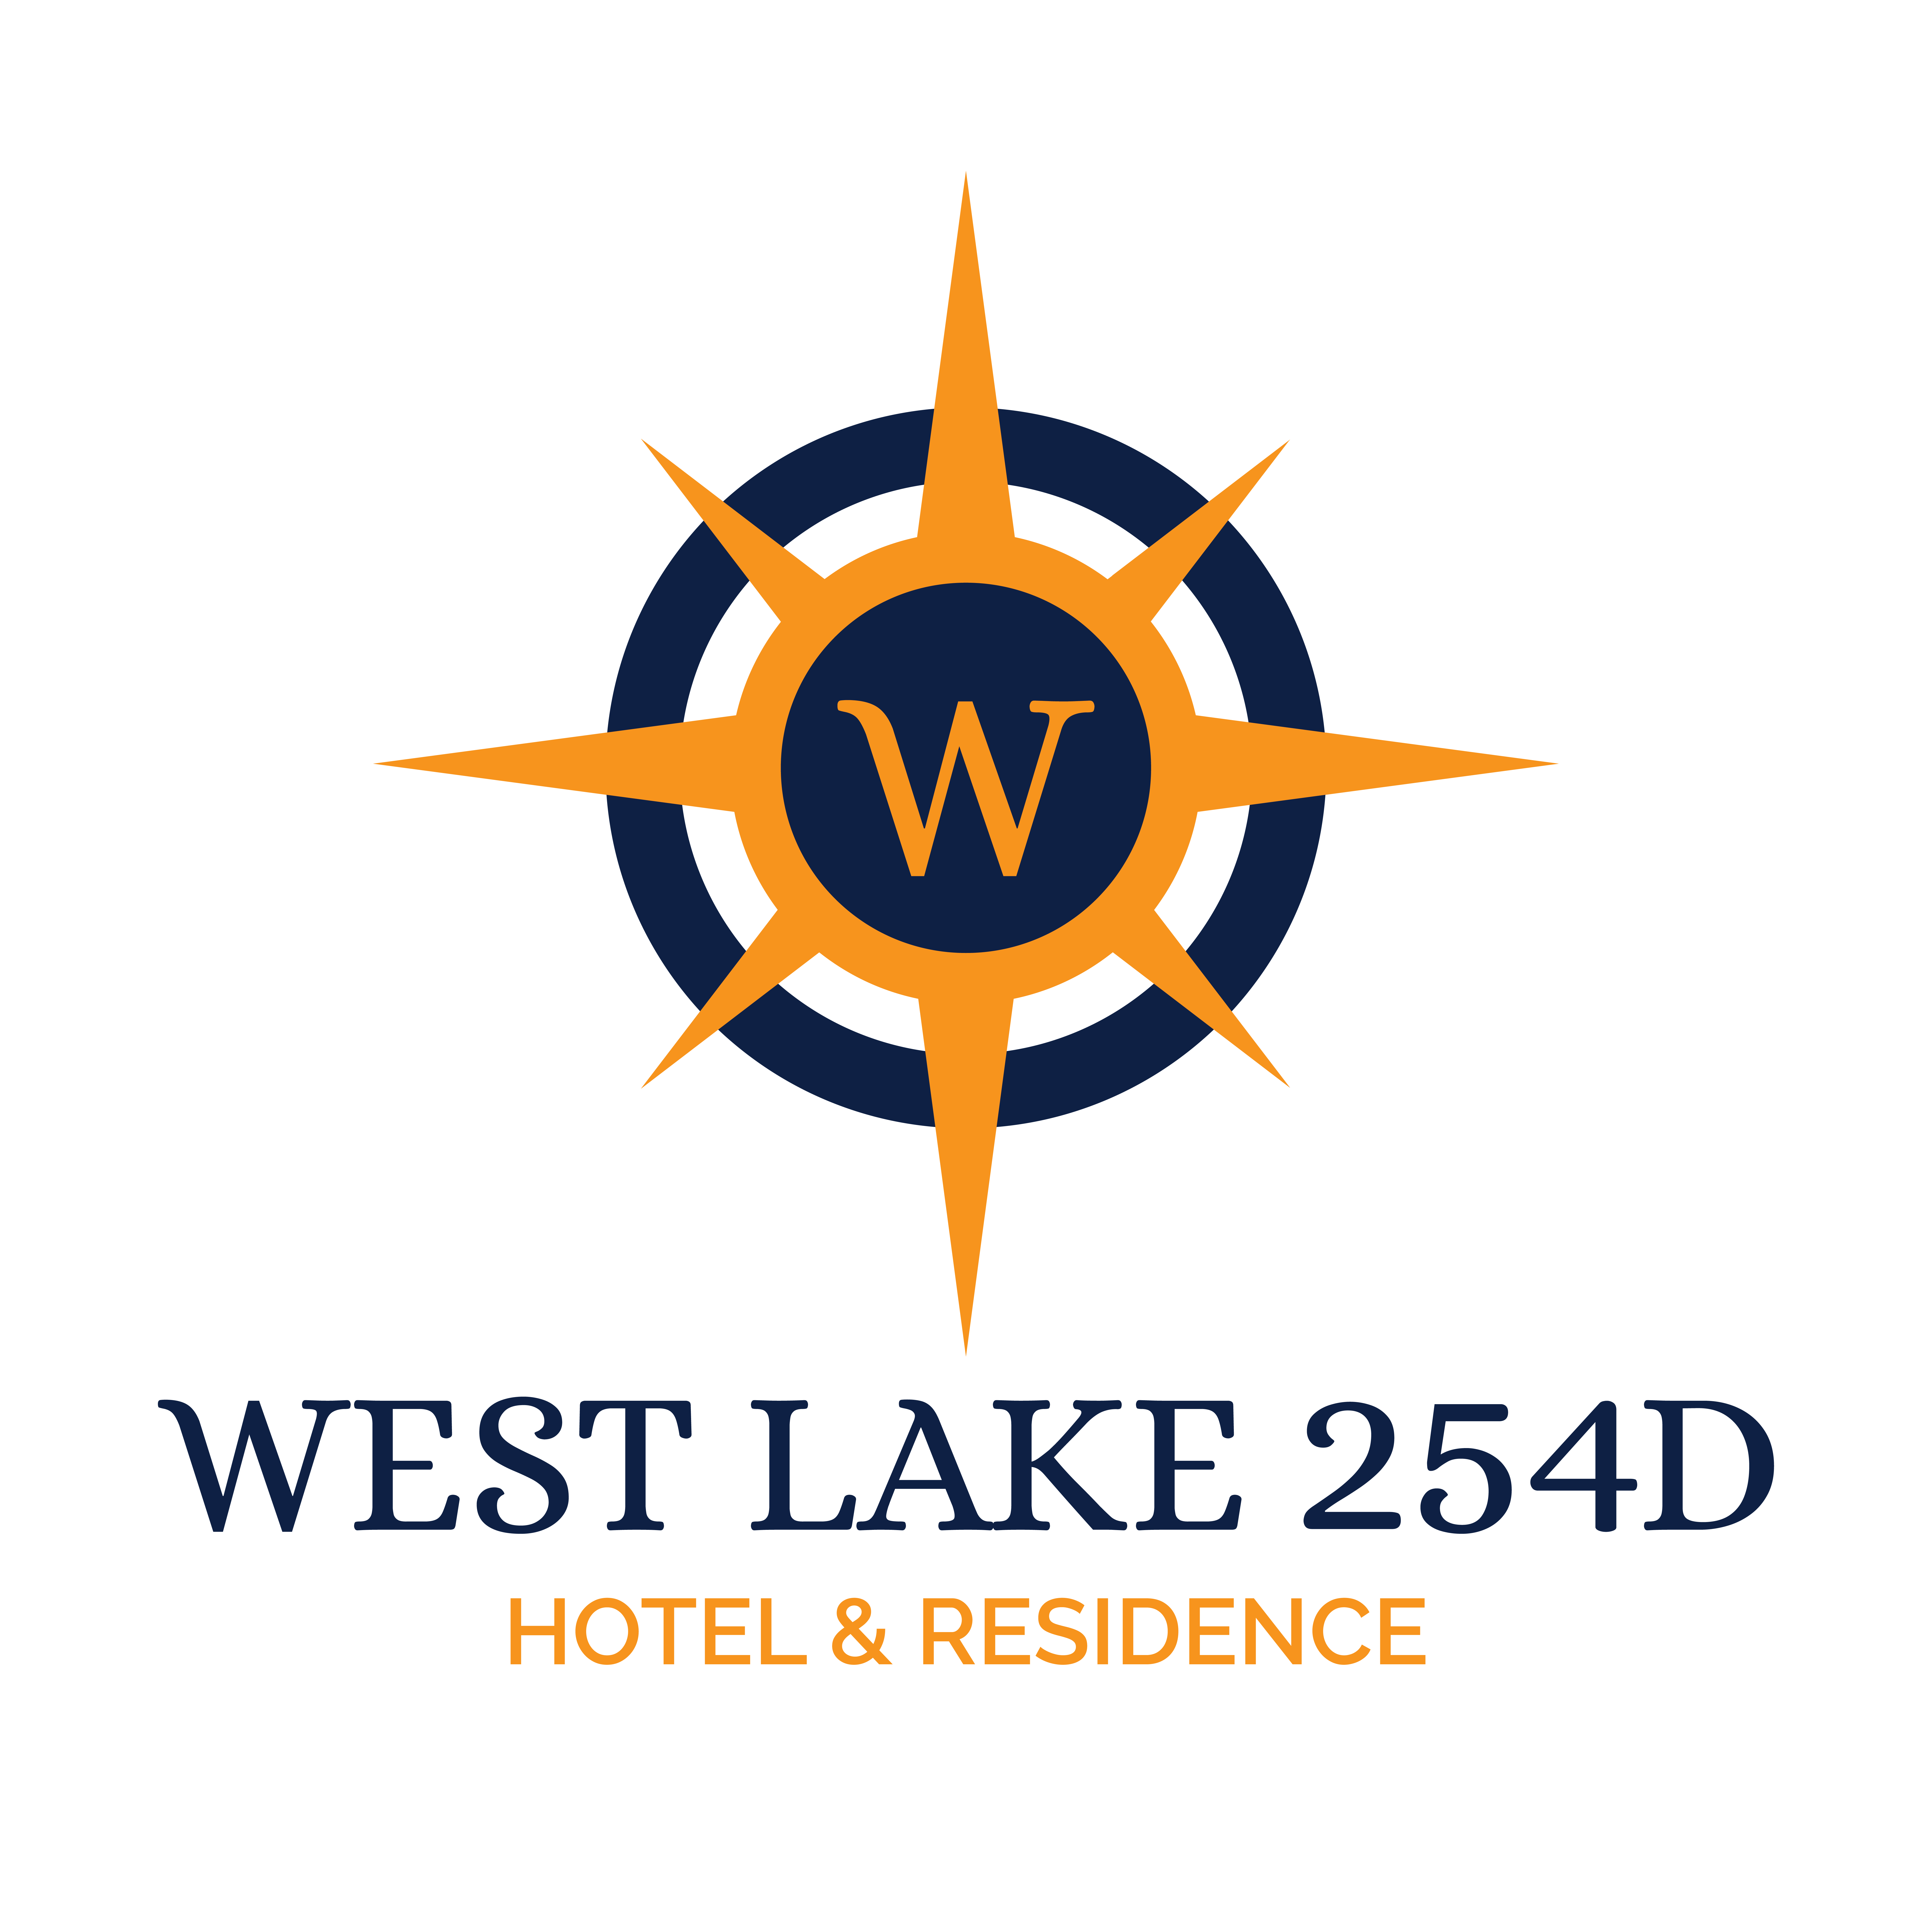 WEST LAKE 254D HOTEL & RESIDENCE